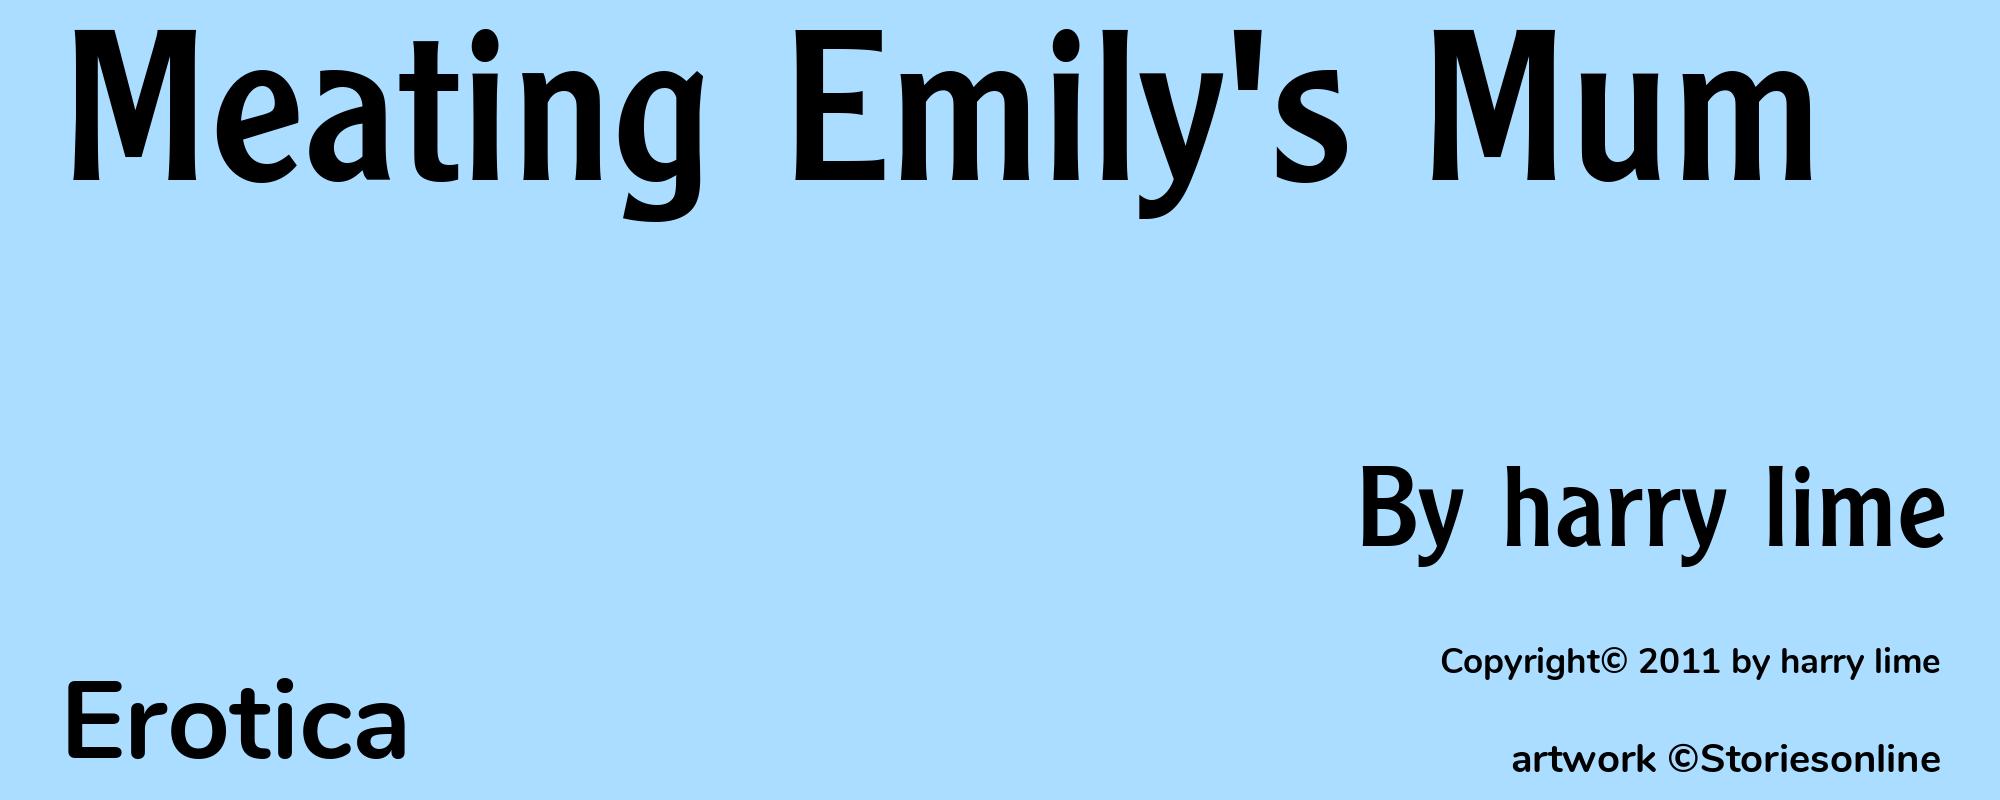 Meating Emily's Mum - Cover